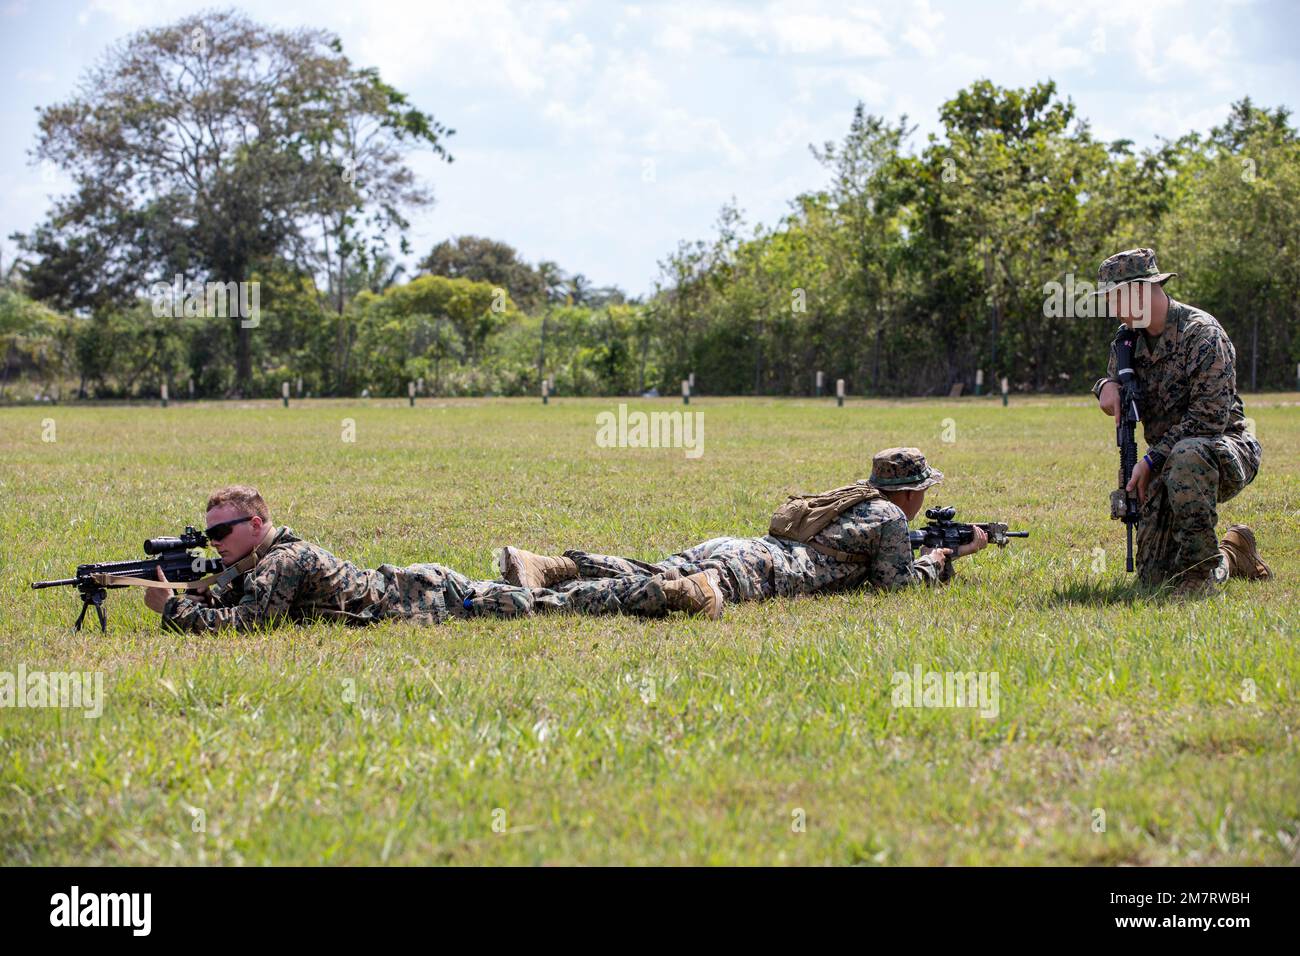 U.S. Marines assigned to 3rd Battalion, 25th Marines practice squad movement tactics with Soldiers from St. Lucia and Mexico at the National Police Traning Academy in Belmopan, Belize as part of the TRADEWINDS22 exercise May 12, 2022. Tradewinds 2022 is a multinational exercise designed to expand the Caribbean region’s capability to mitigate, plan for, and respond to crises; increase regional training capacity and interoperability; develop new and refine existing standard operating procedures; enhance ability to defend exclusive economic zones; and promote human rights and adherence to shared Stock Photo